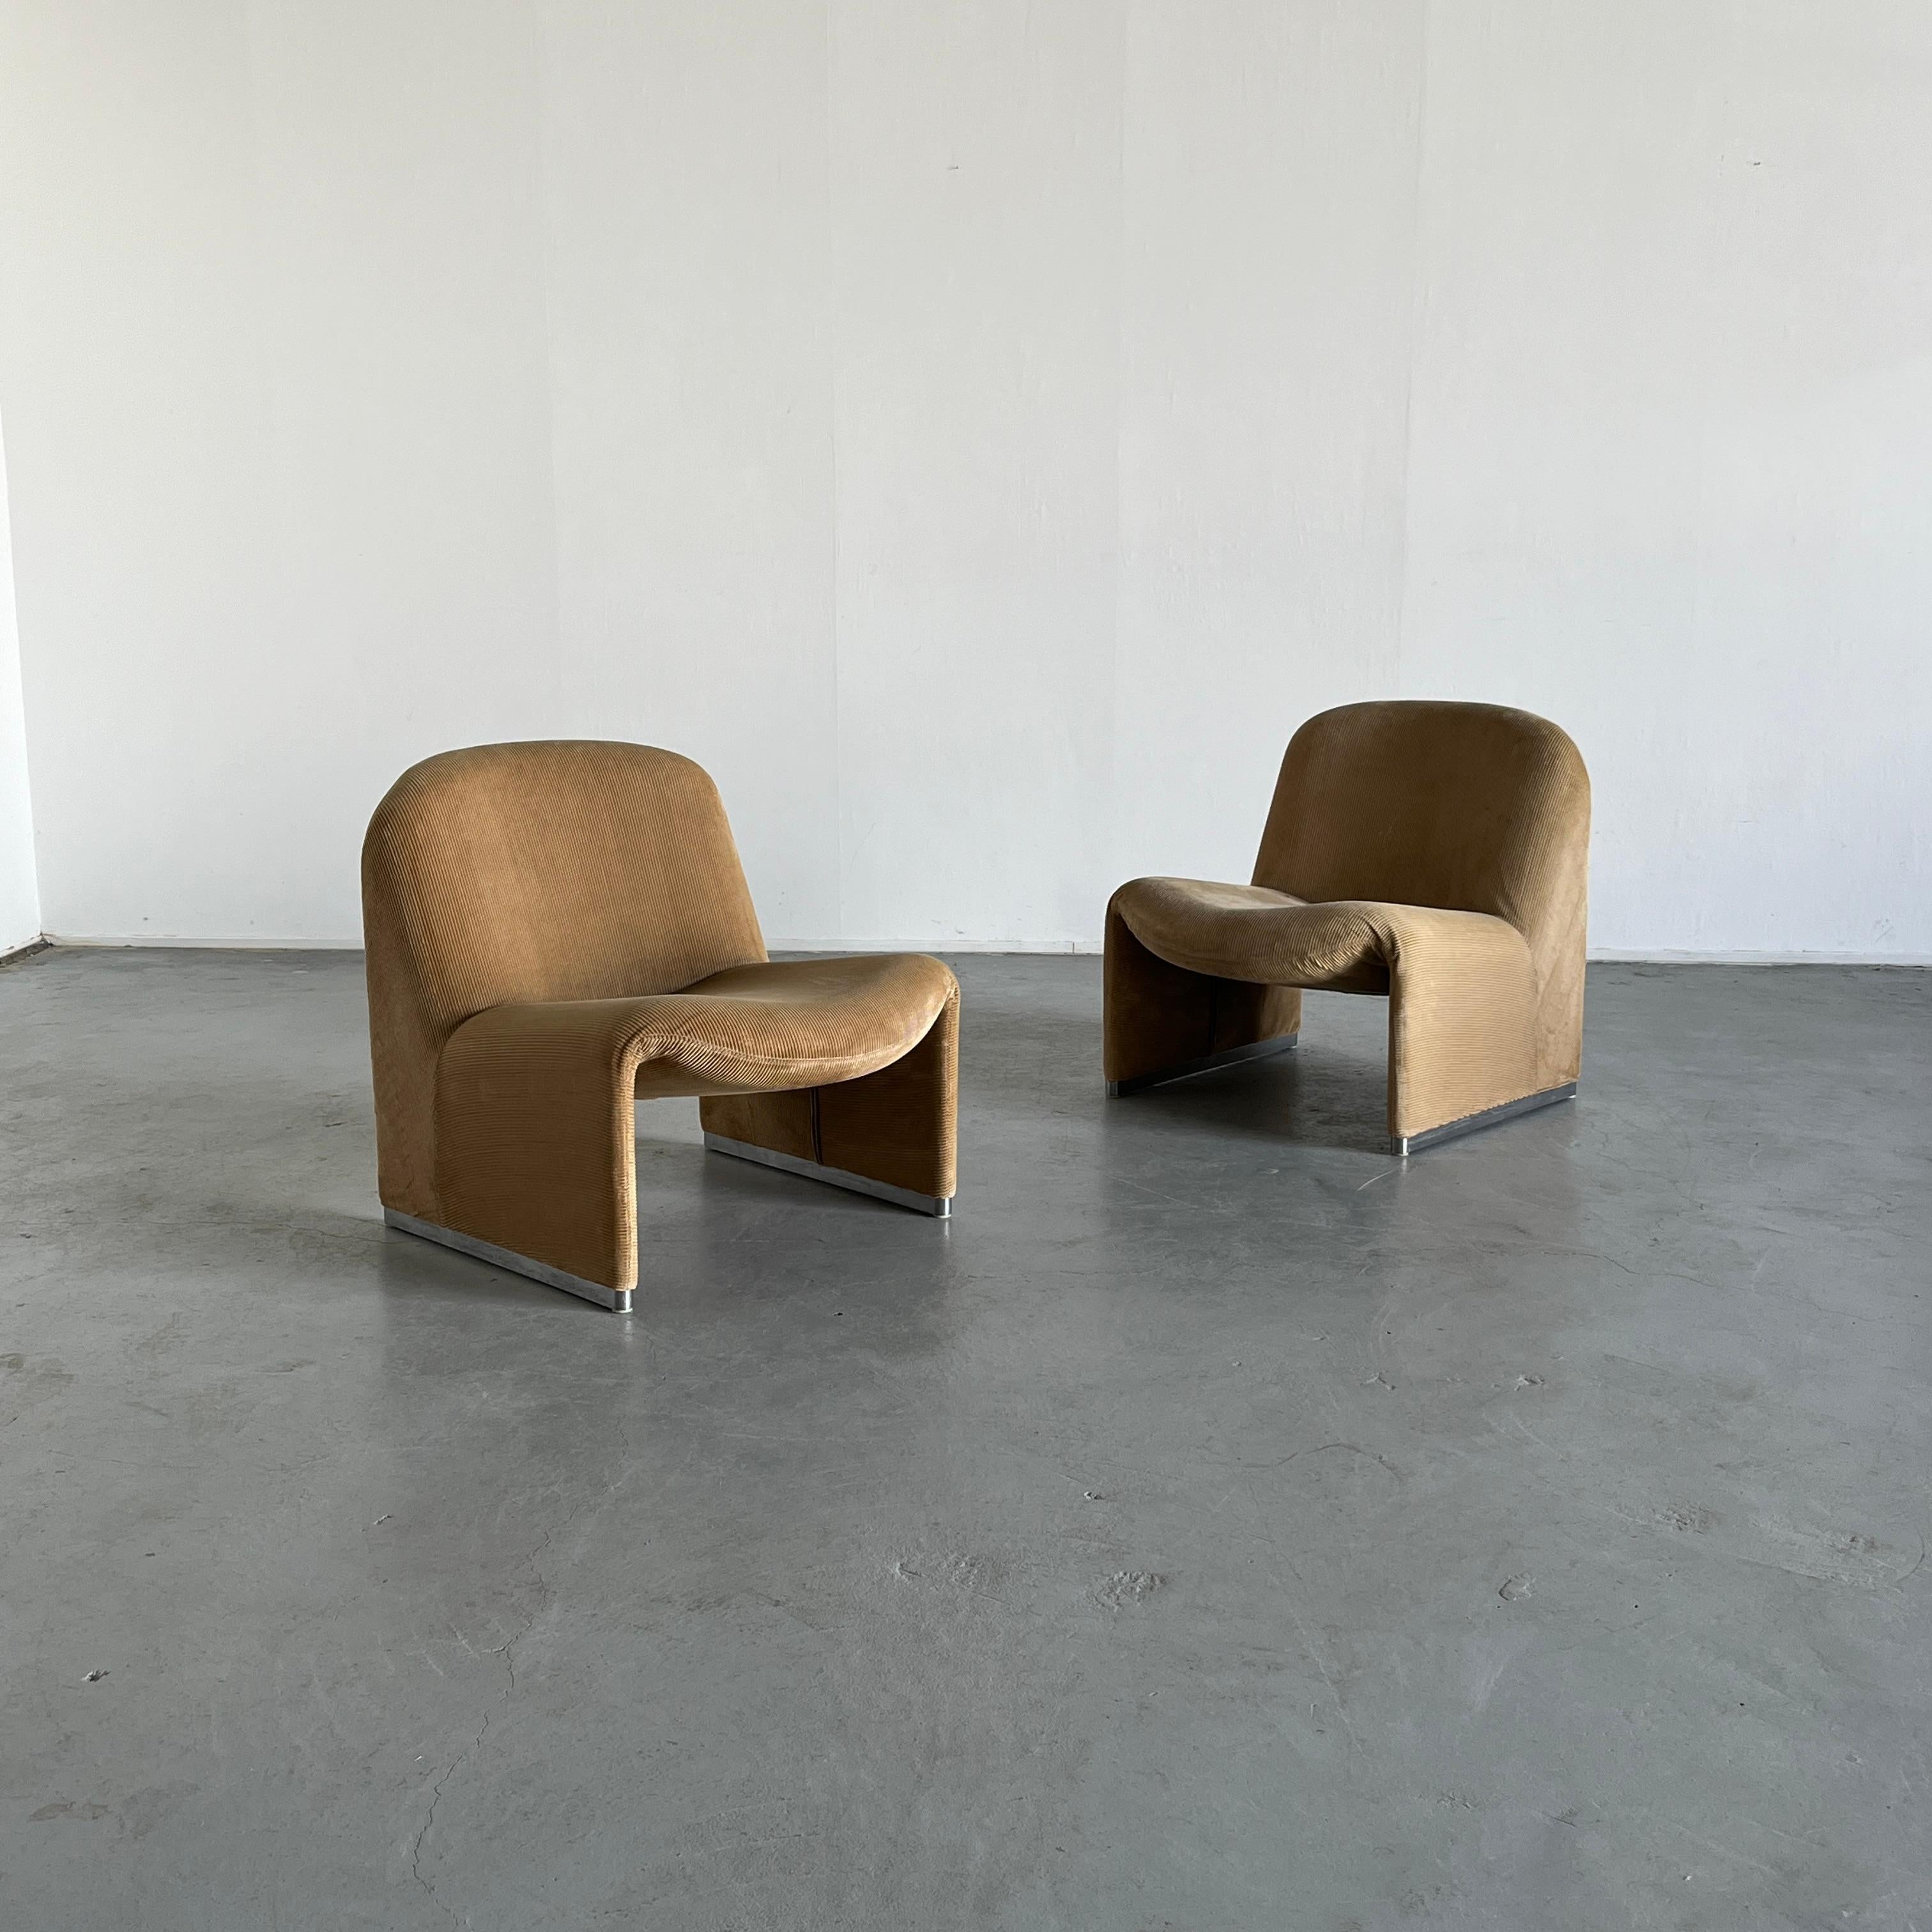 Two original vintage iconic 'Alky' chairs, designed by Giancarlo Piretti for Anonima Castelli.
A rare early 1970s production in beige 100% cotton corduroy.
Iconic Italian design.

Sold as a pair (two pieces)

Labeled.

Original vintage condition and